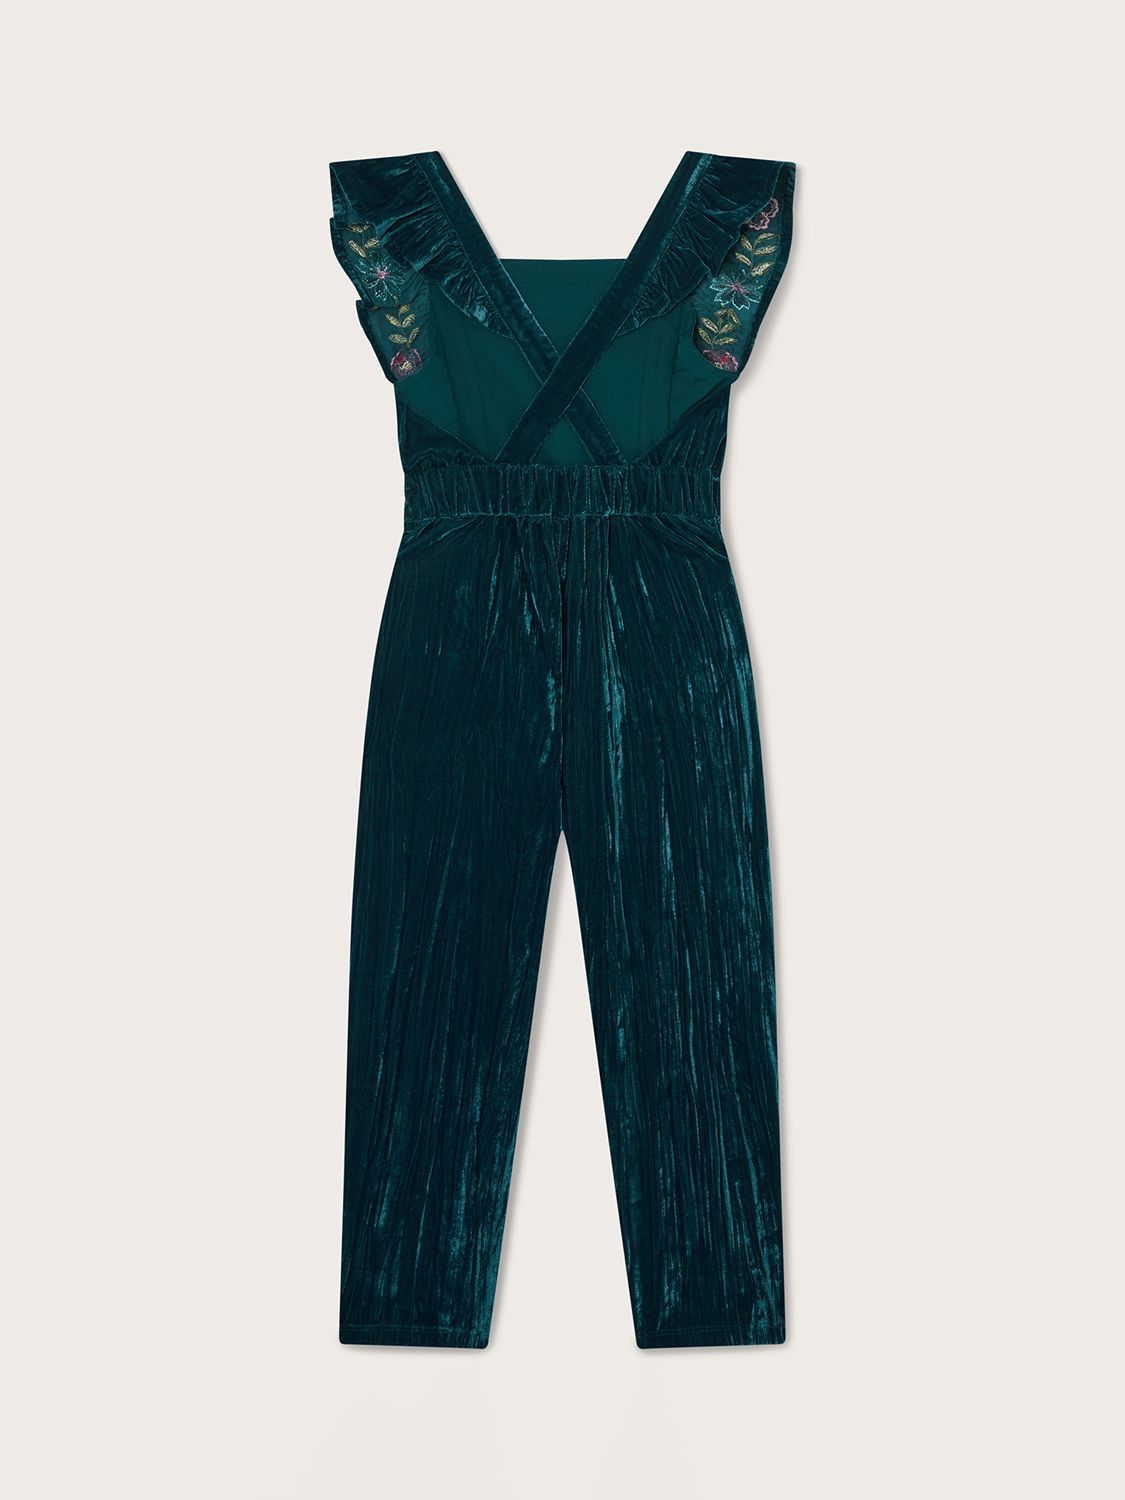 Monsoon Kids' Boutique Floral Embroidered Dungarees, Teal, 9-10 years